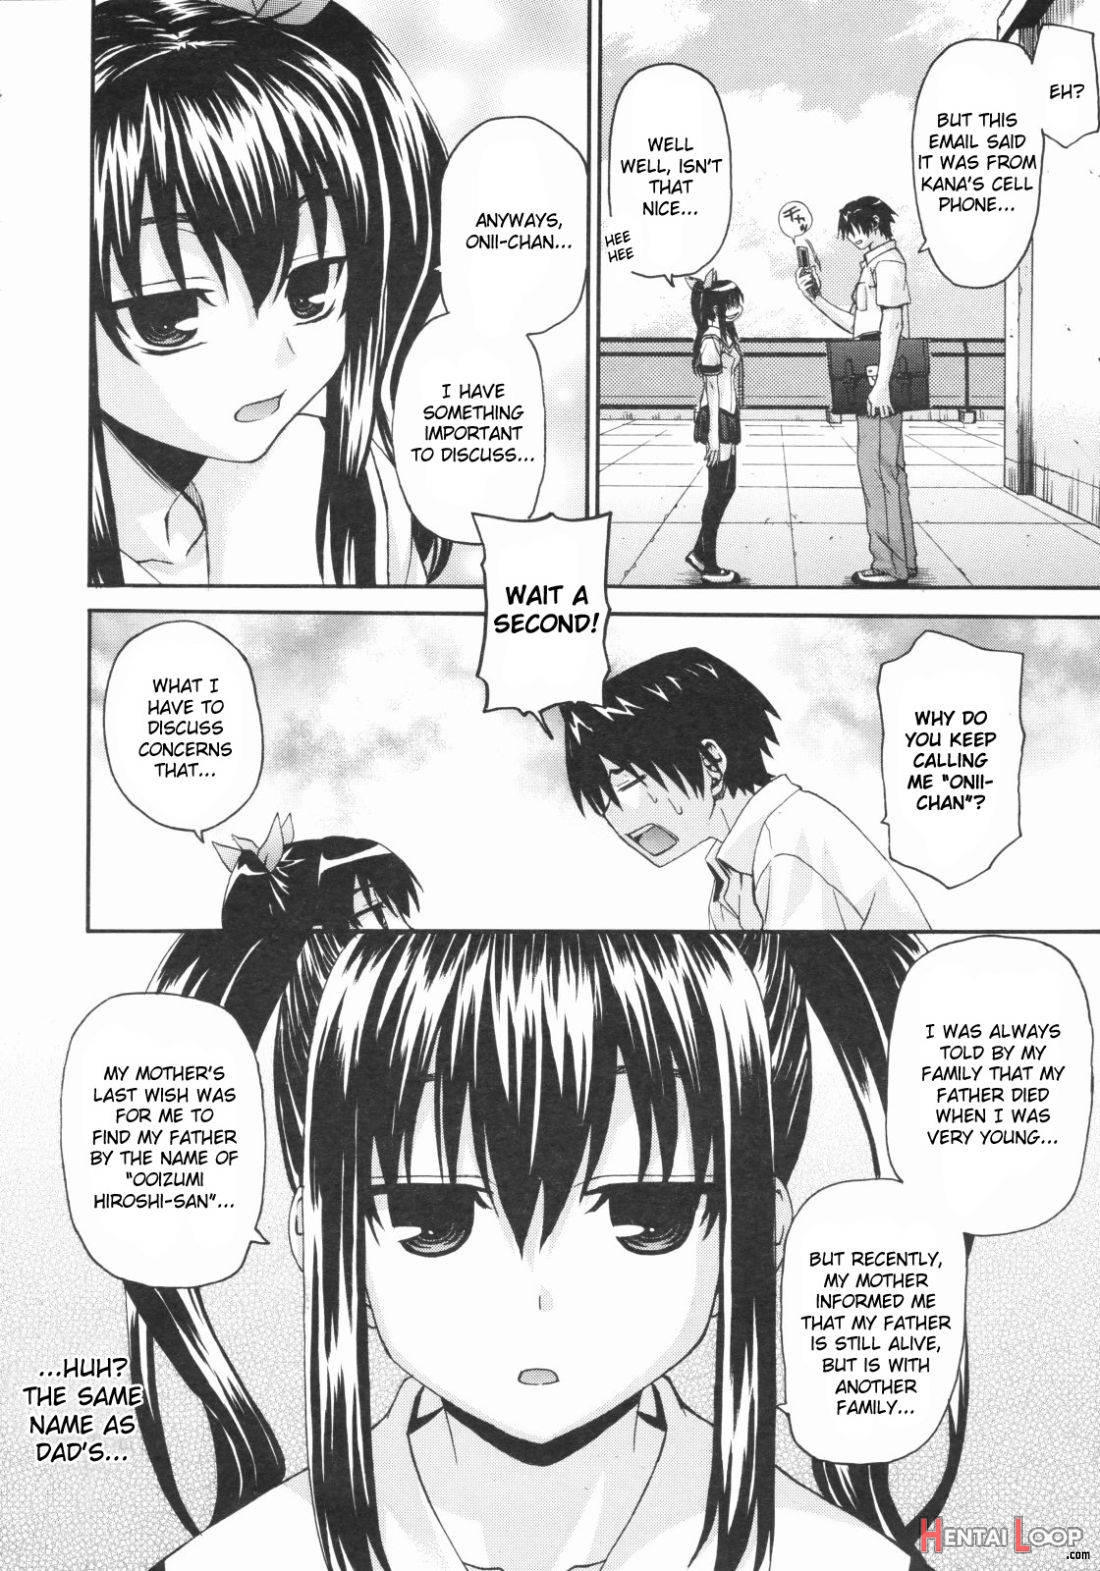 Onegai Sister+ page 4